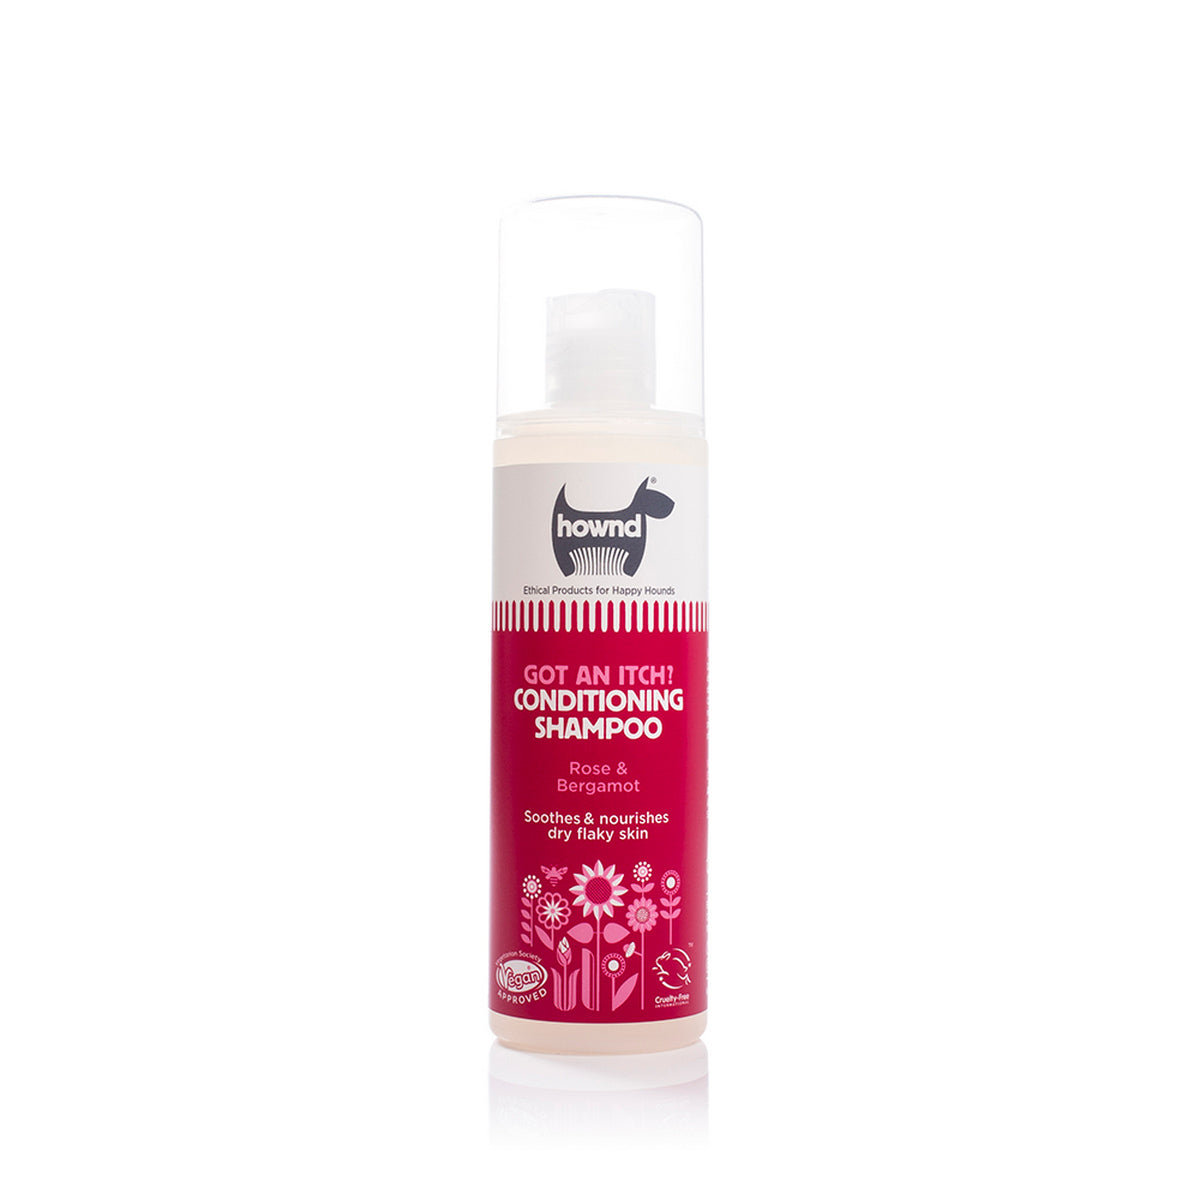 Got An Itch? Conditioning Shampoo (250ml) - Hownd